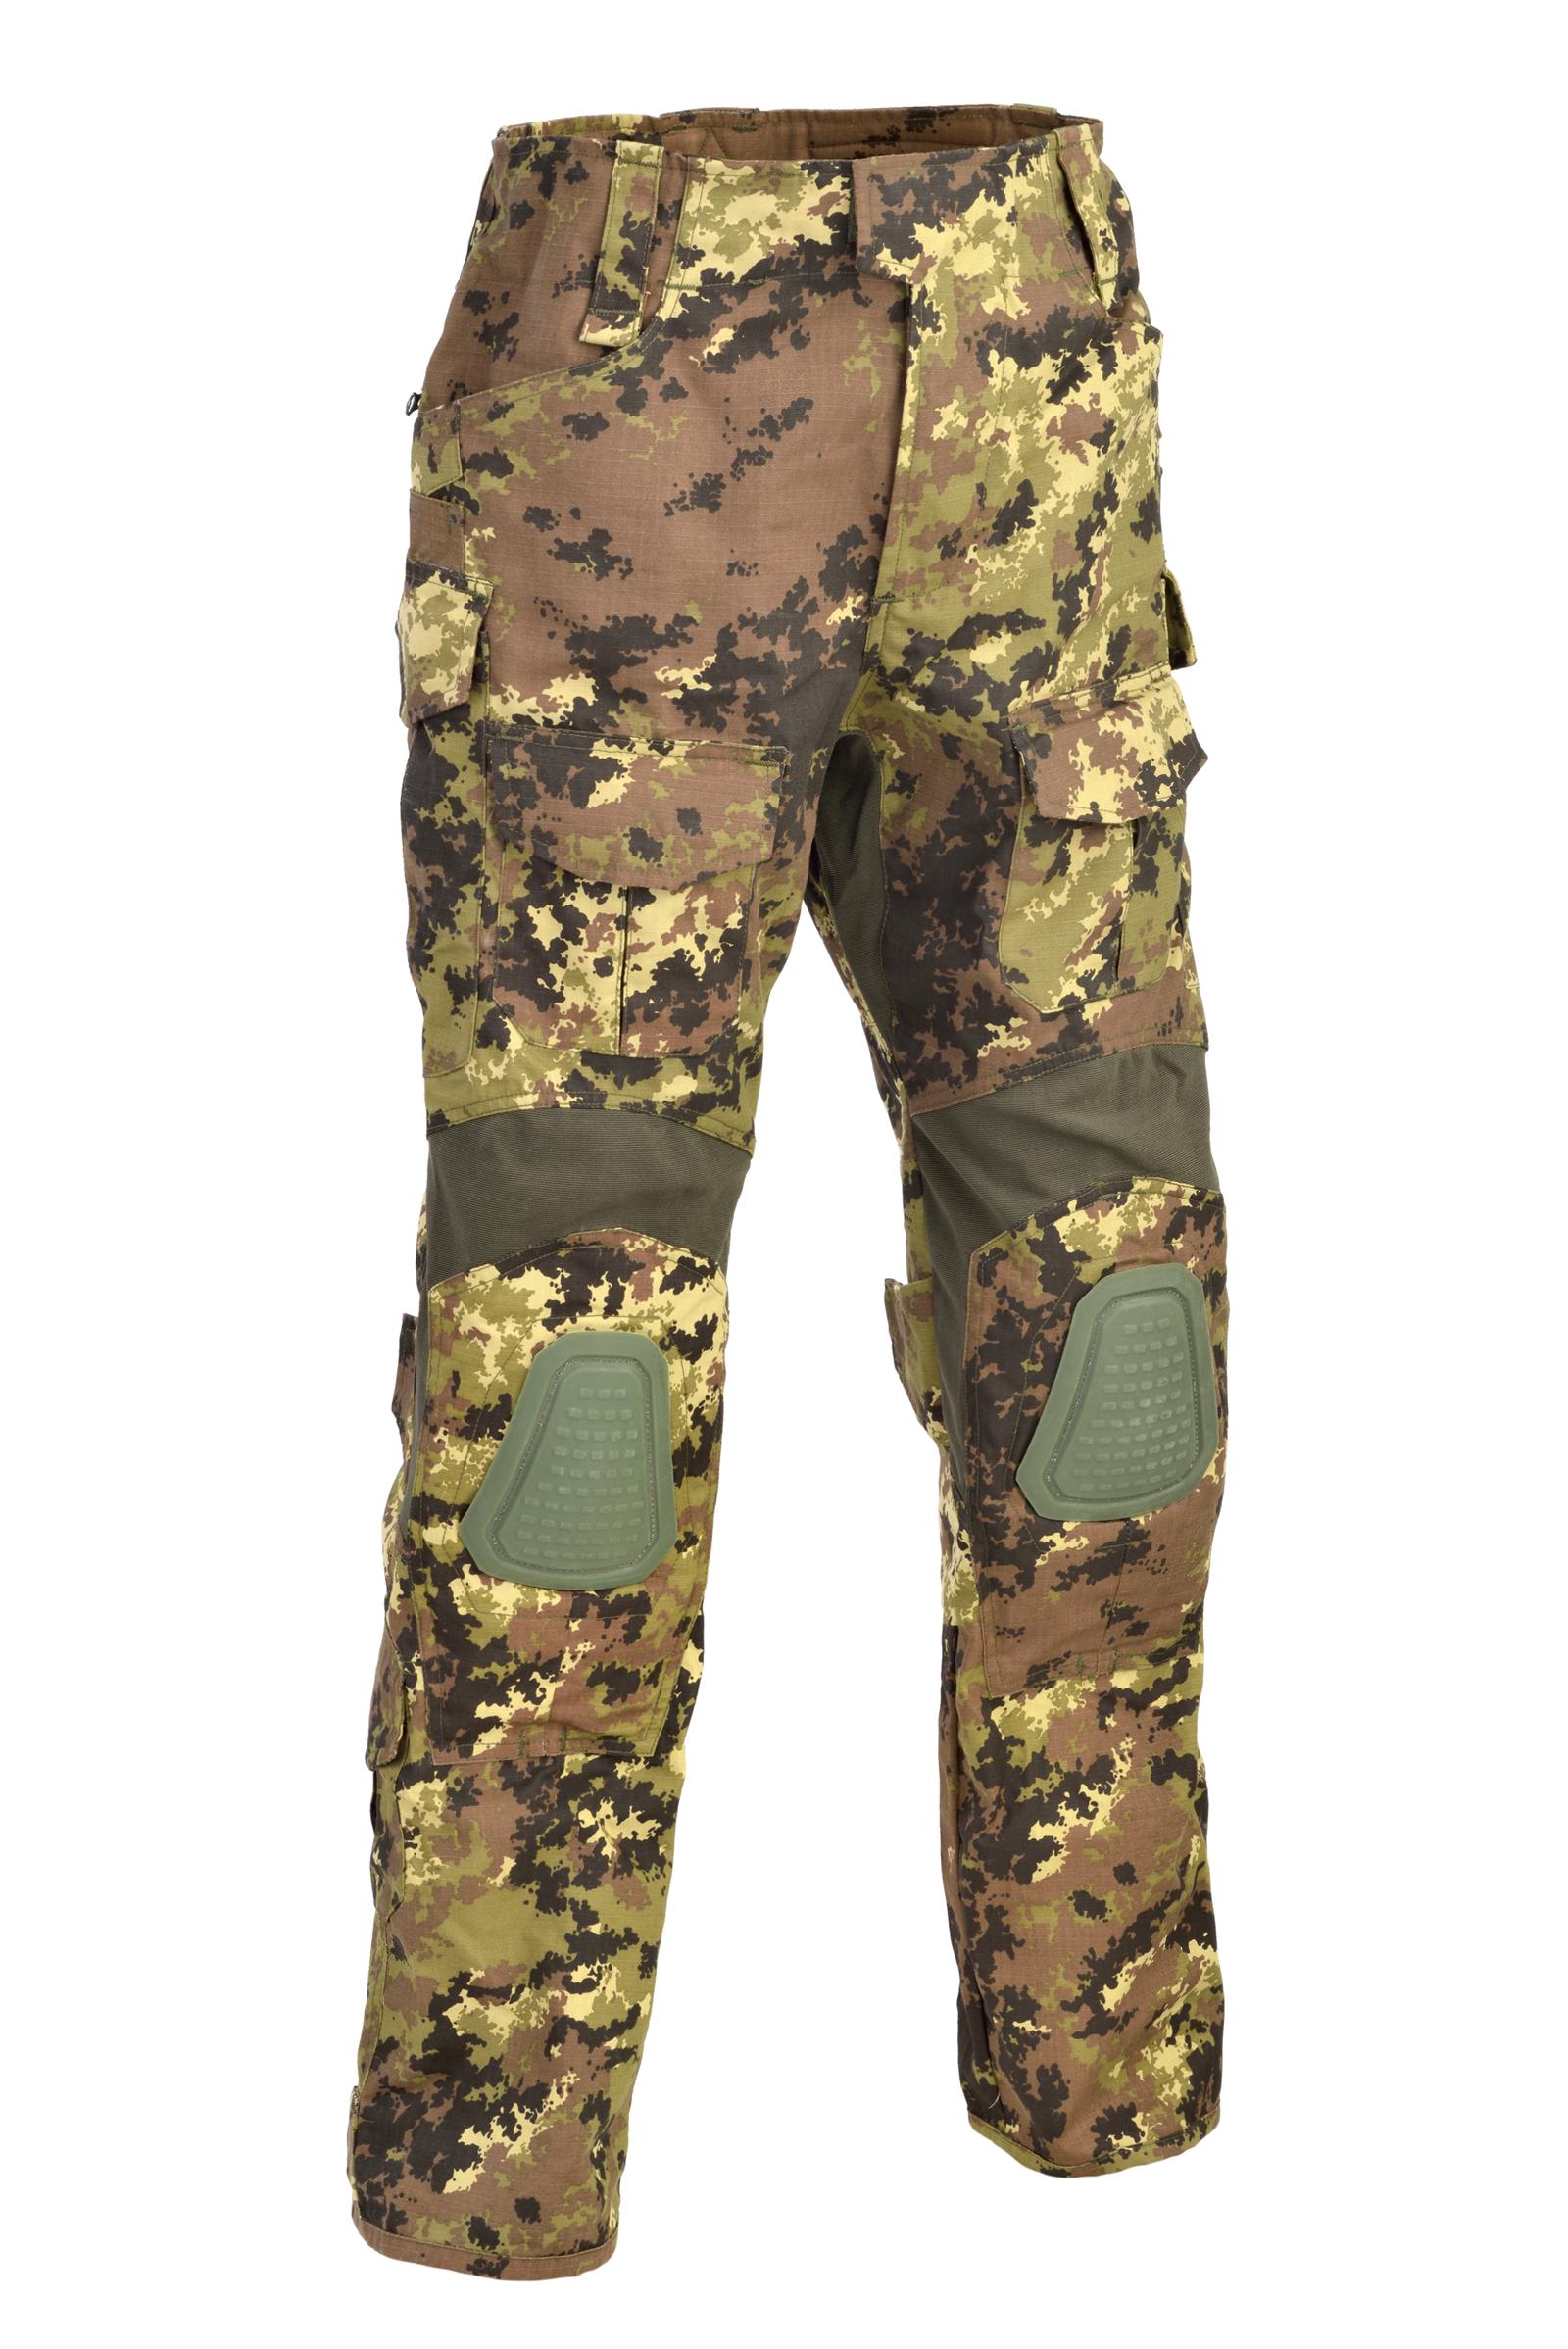 DEFCON 5 GLADIO TACTICAL PANTS WITH PLASTIC KNEE PADS - D5-3227 - Trousers  and Shorts - Defcon 5 Italy